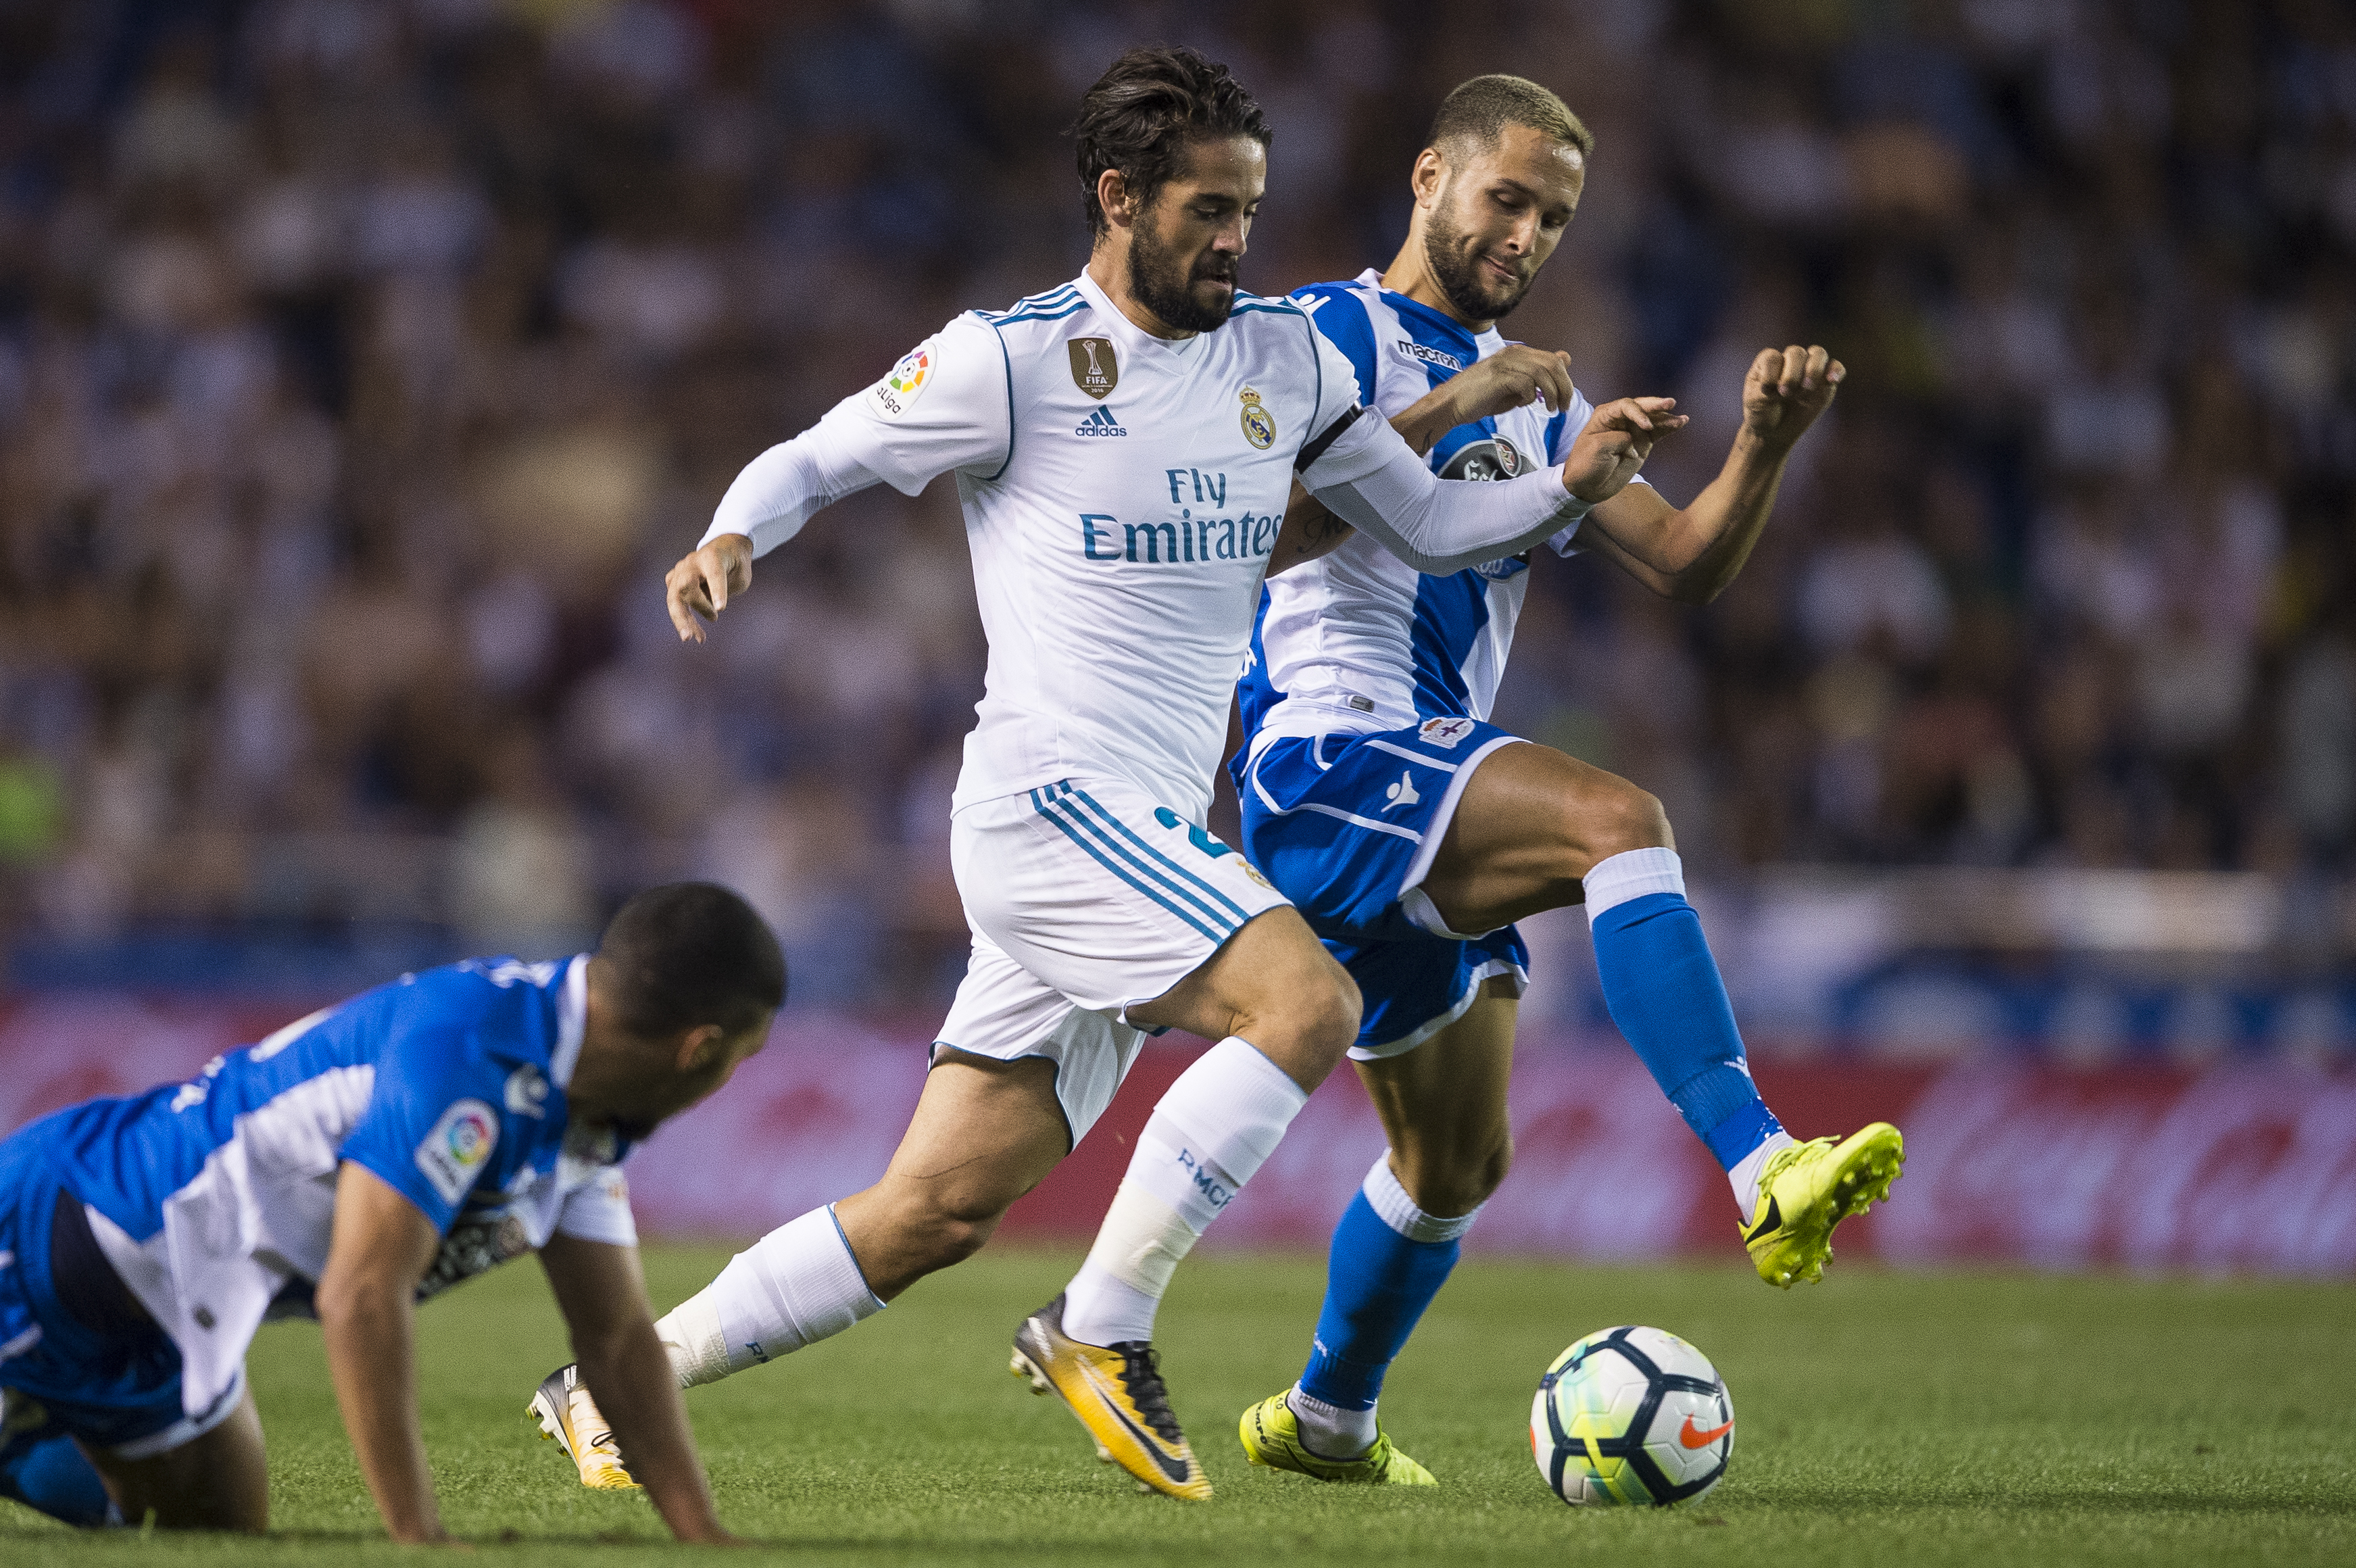 LA CORUNA, SPAIN - AUGUST 20: Florin Andone of RC Deportivo La Coruna competes for the ball with Isco of Real Madrid during the La Liga match between Deportivo La Coruna and Real Madrid at Riazor Stadium on August 20, 2017 in La Coruna, Spain. (Photo by Octavio Passos/Getty Images)